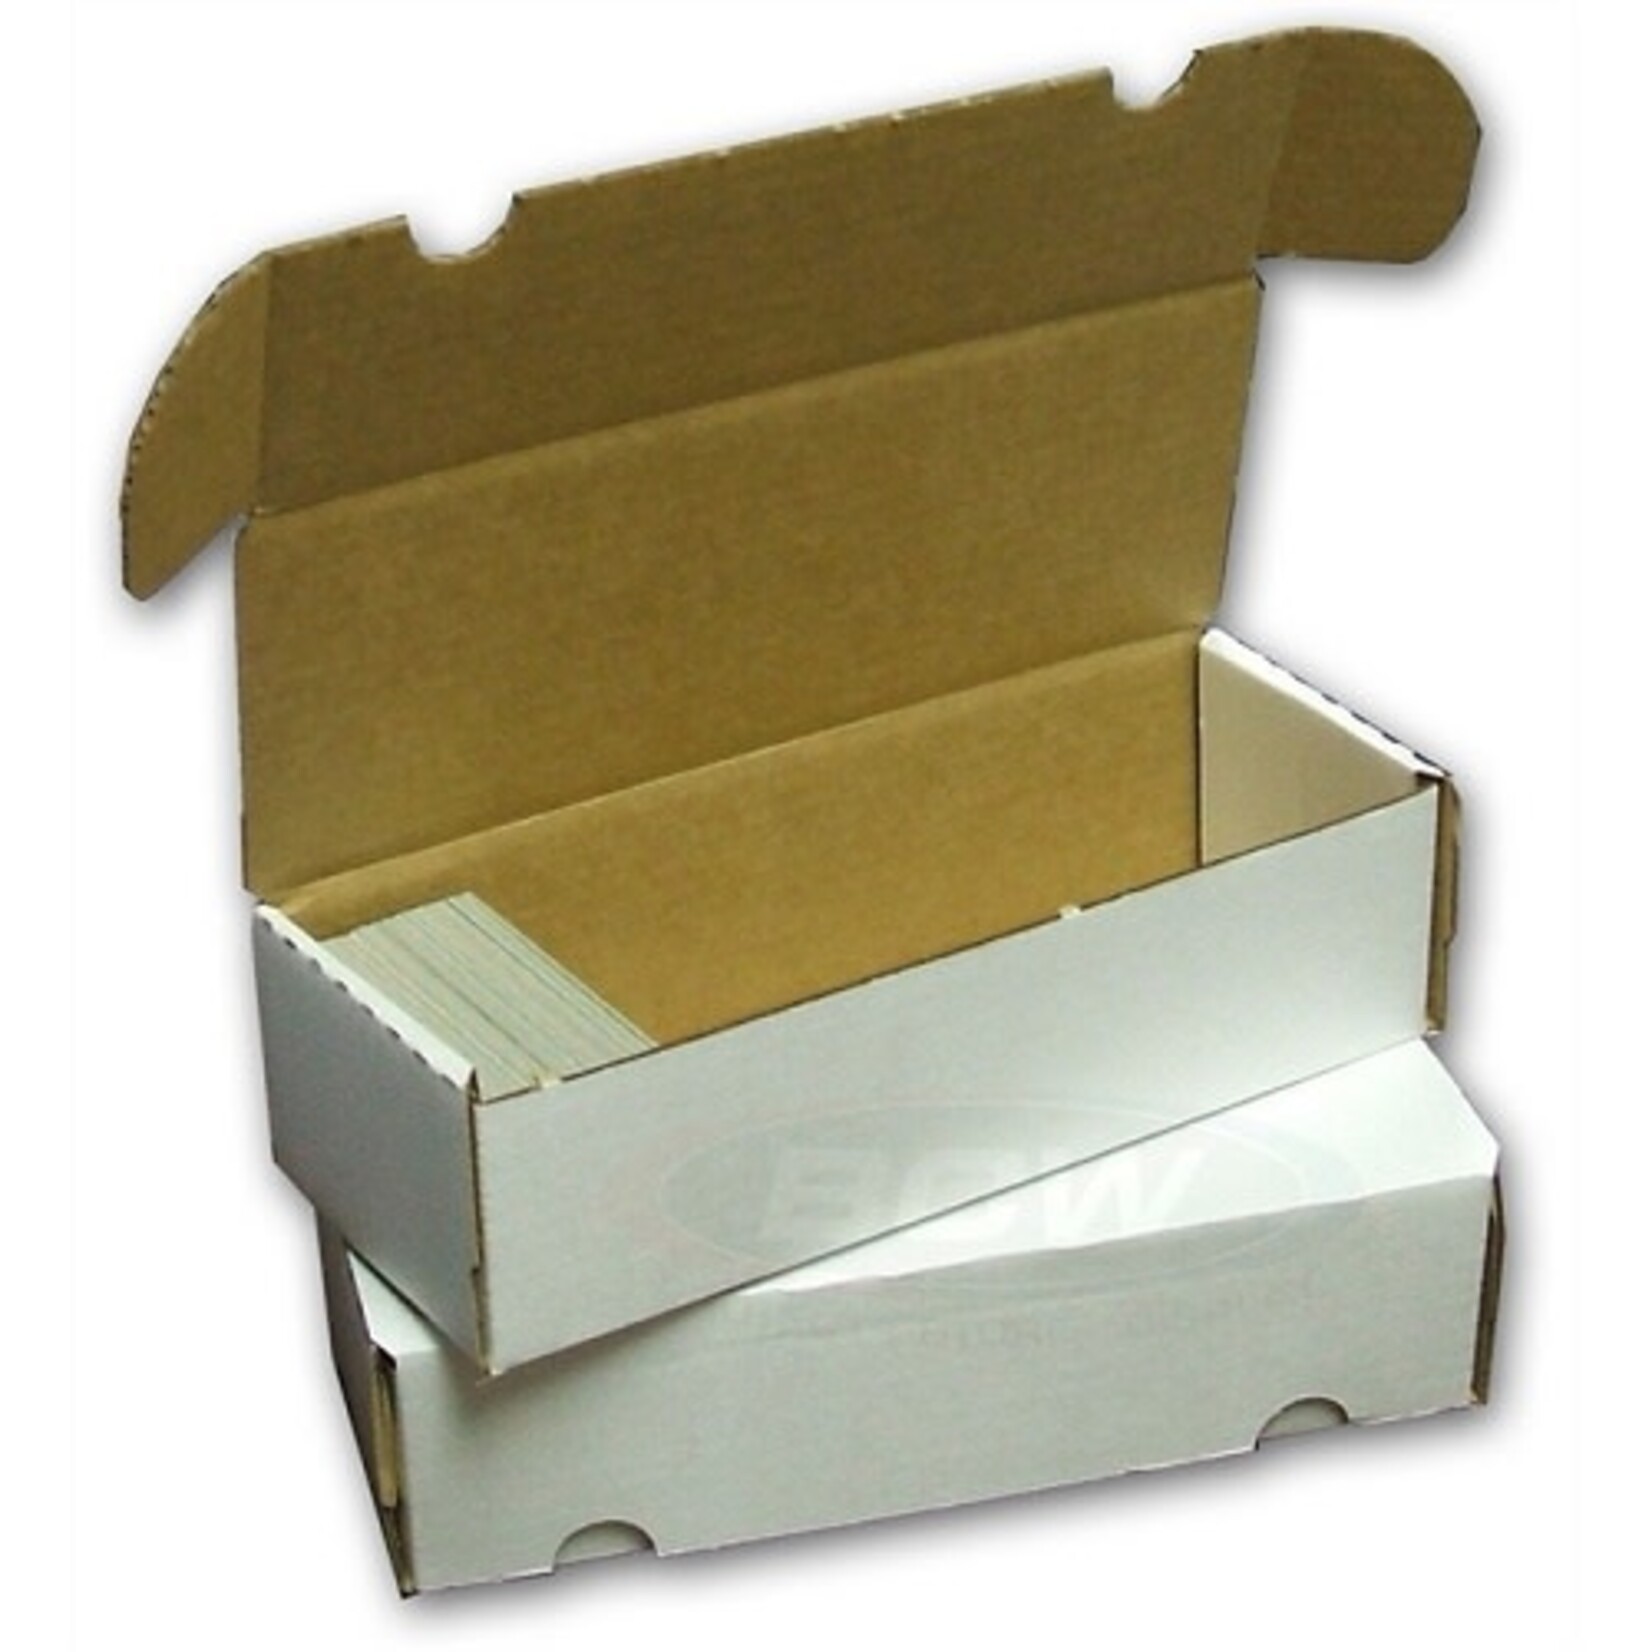 BCW 550CT CARDBOARD BOX (Pick up only)